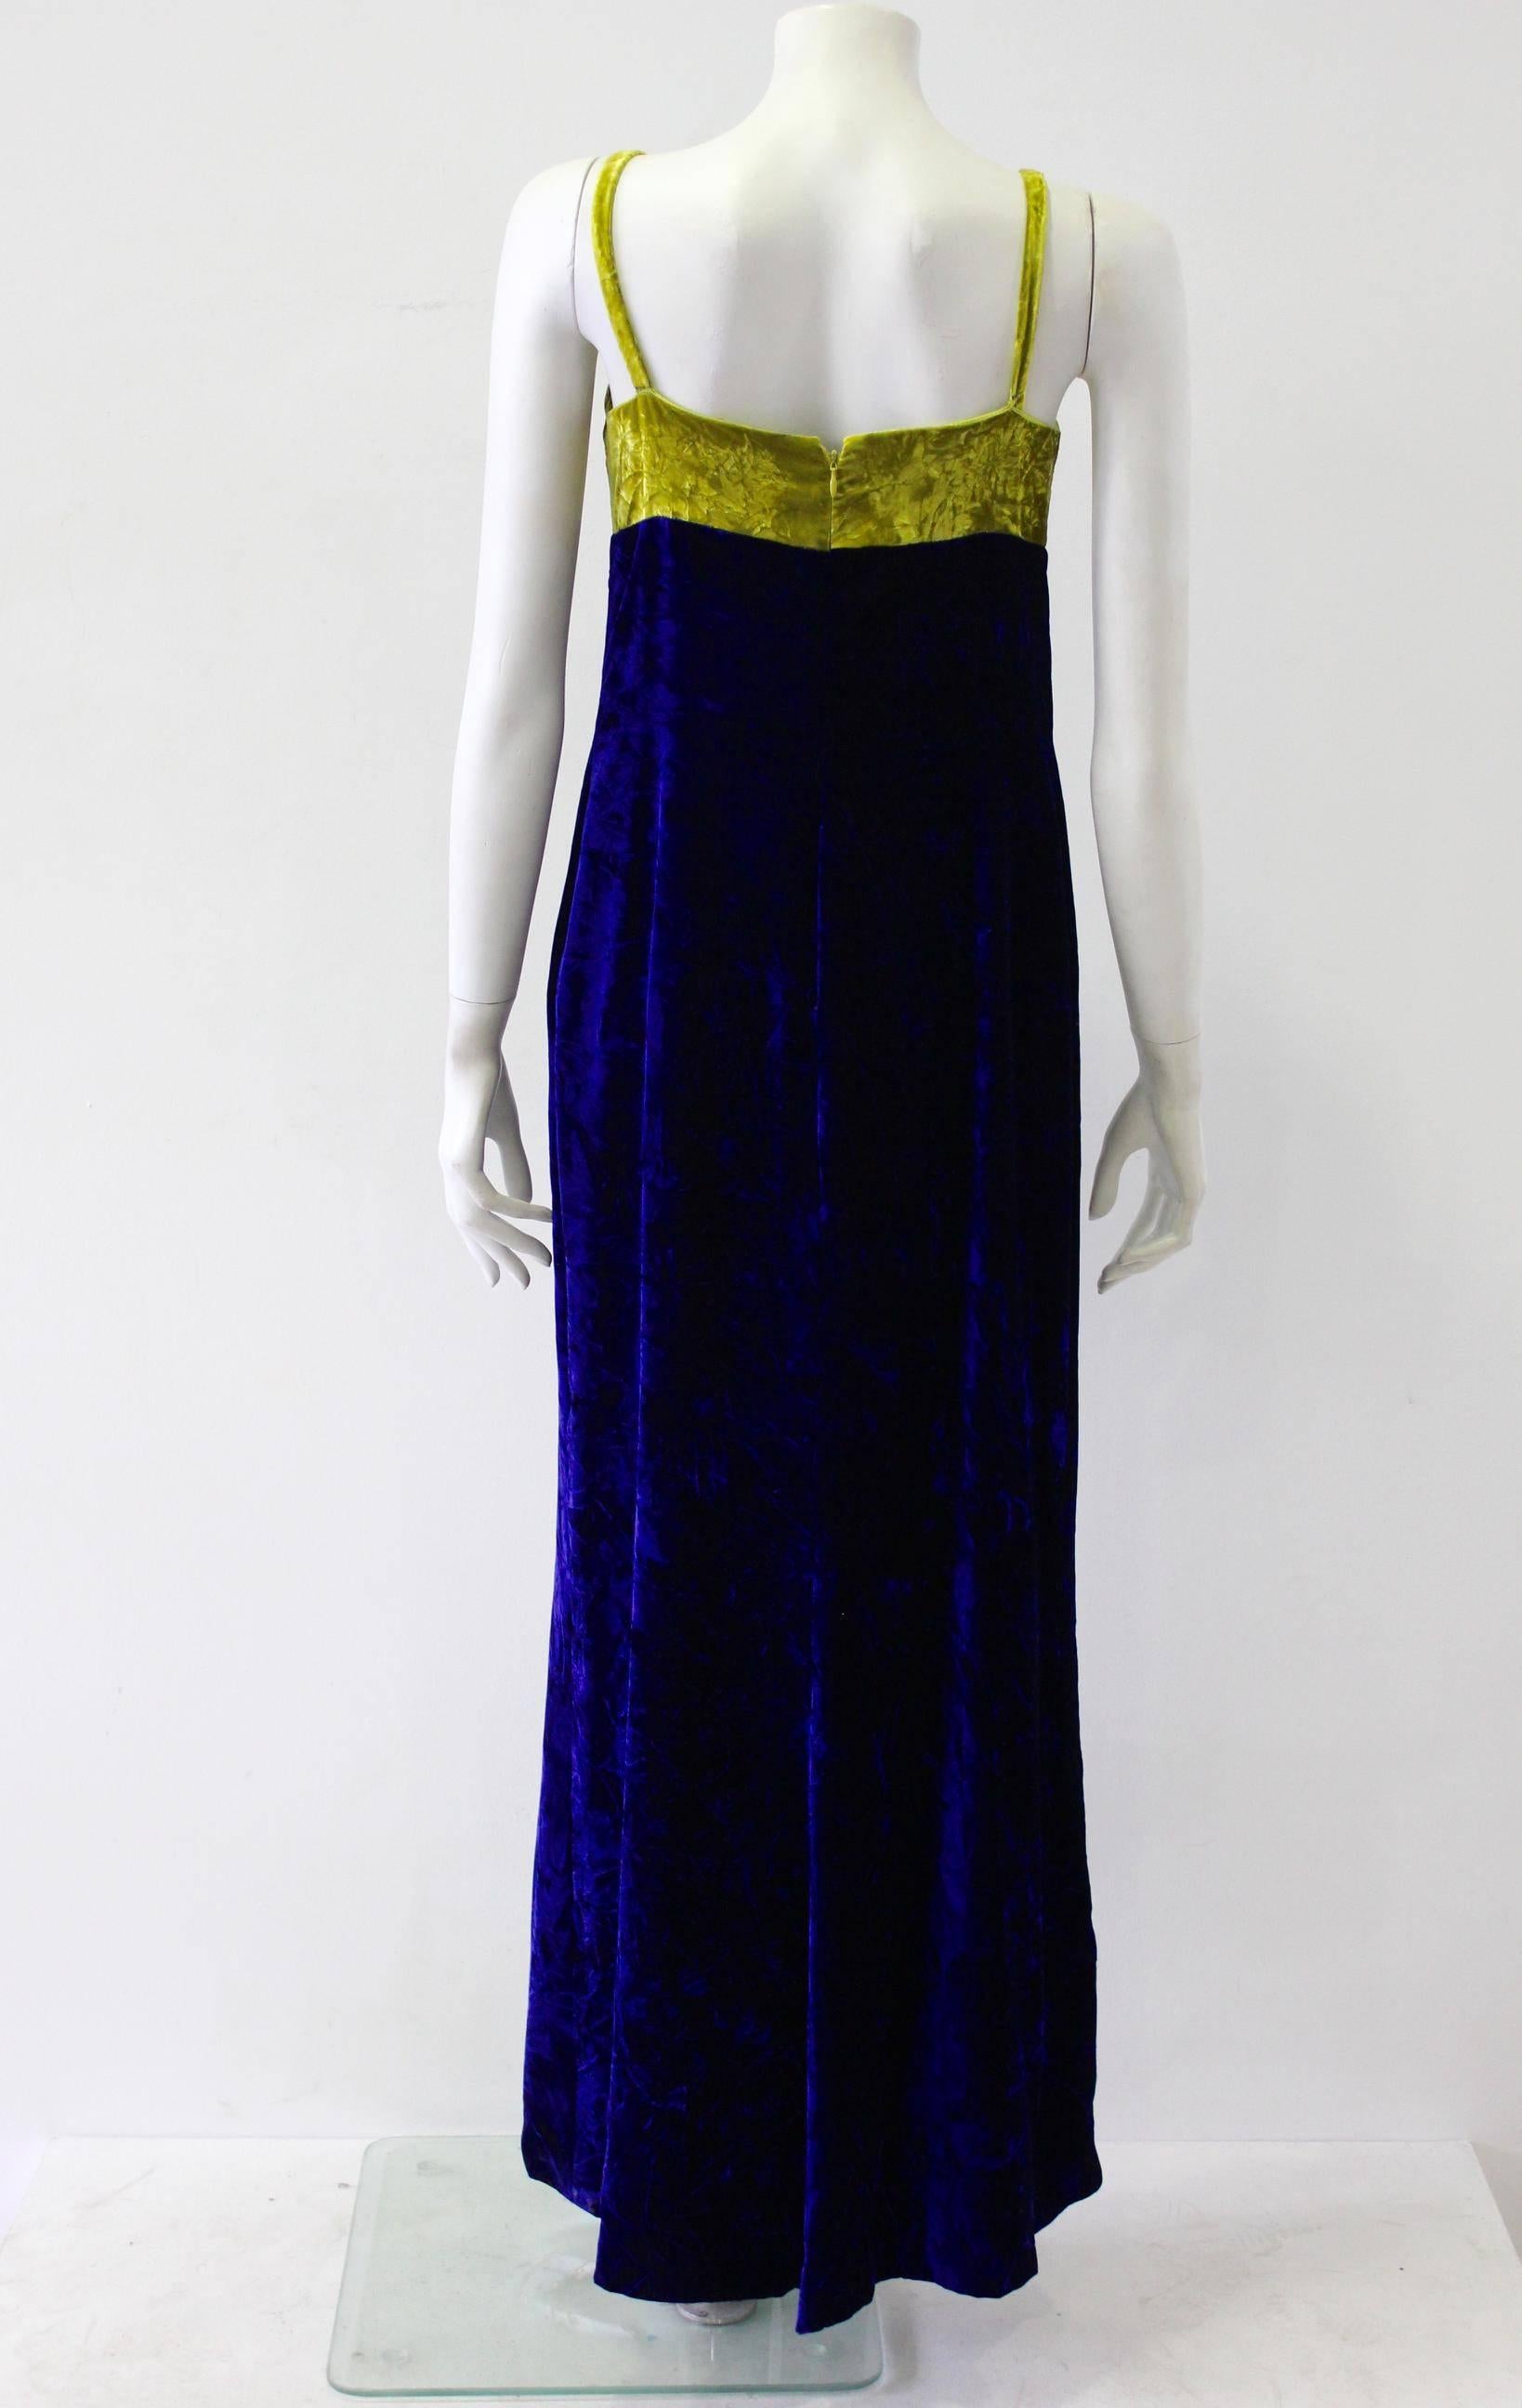 Gianni Versace Istante Crushed Velvet Evening Dress Fall 1997 In New Condition For Sale In Athens, Agia Paraskevi